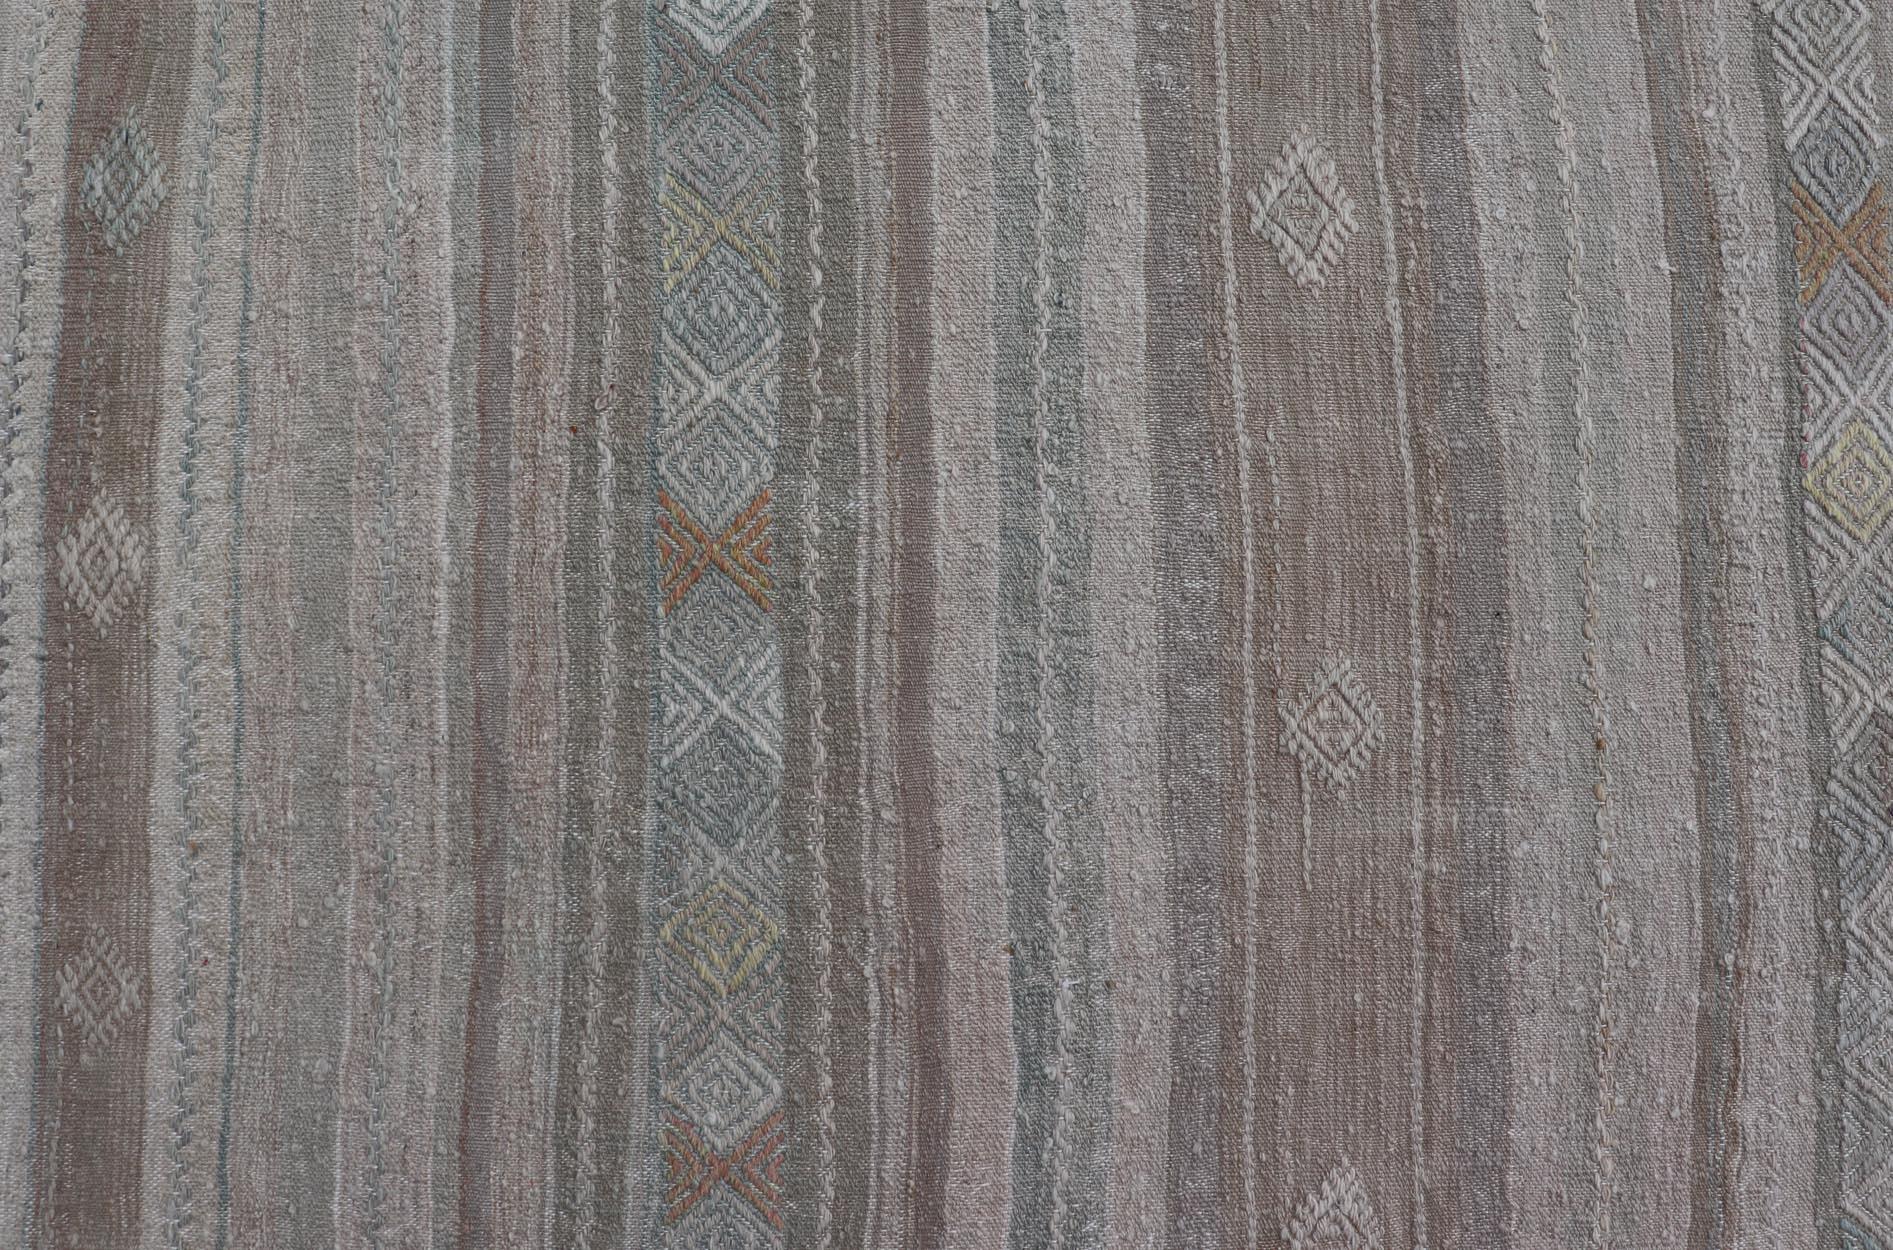 Turkish Flat-Weave Kilim with Embroideries in Taupe, Tan, Light Green, and Grey For Sale 1